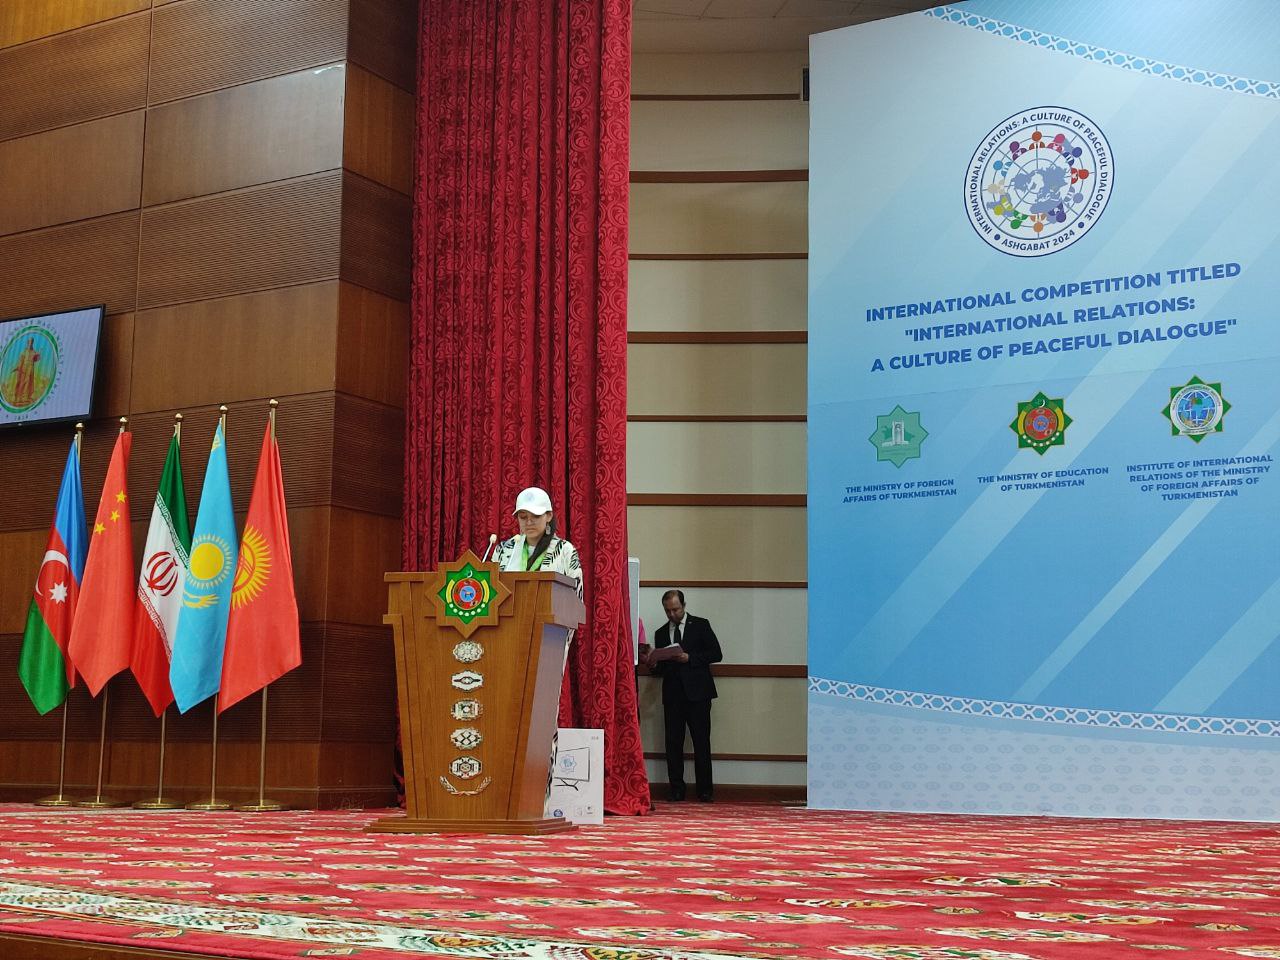 UWED students took part in the competition “International Relations: Culture of Peaceful Dialogue” in Ashgabat